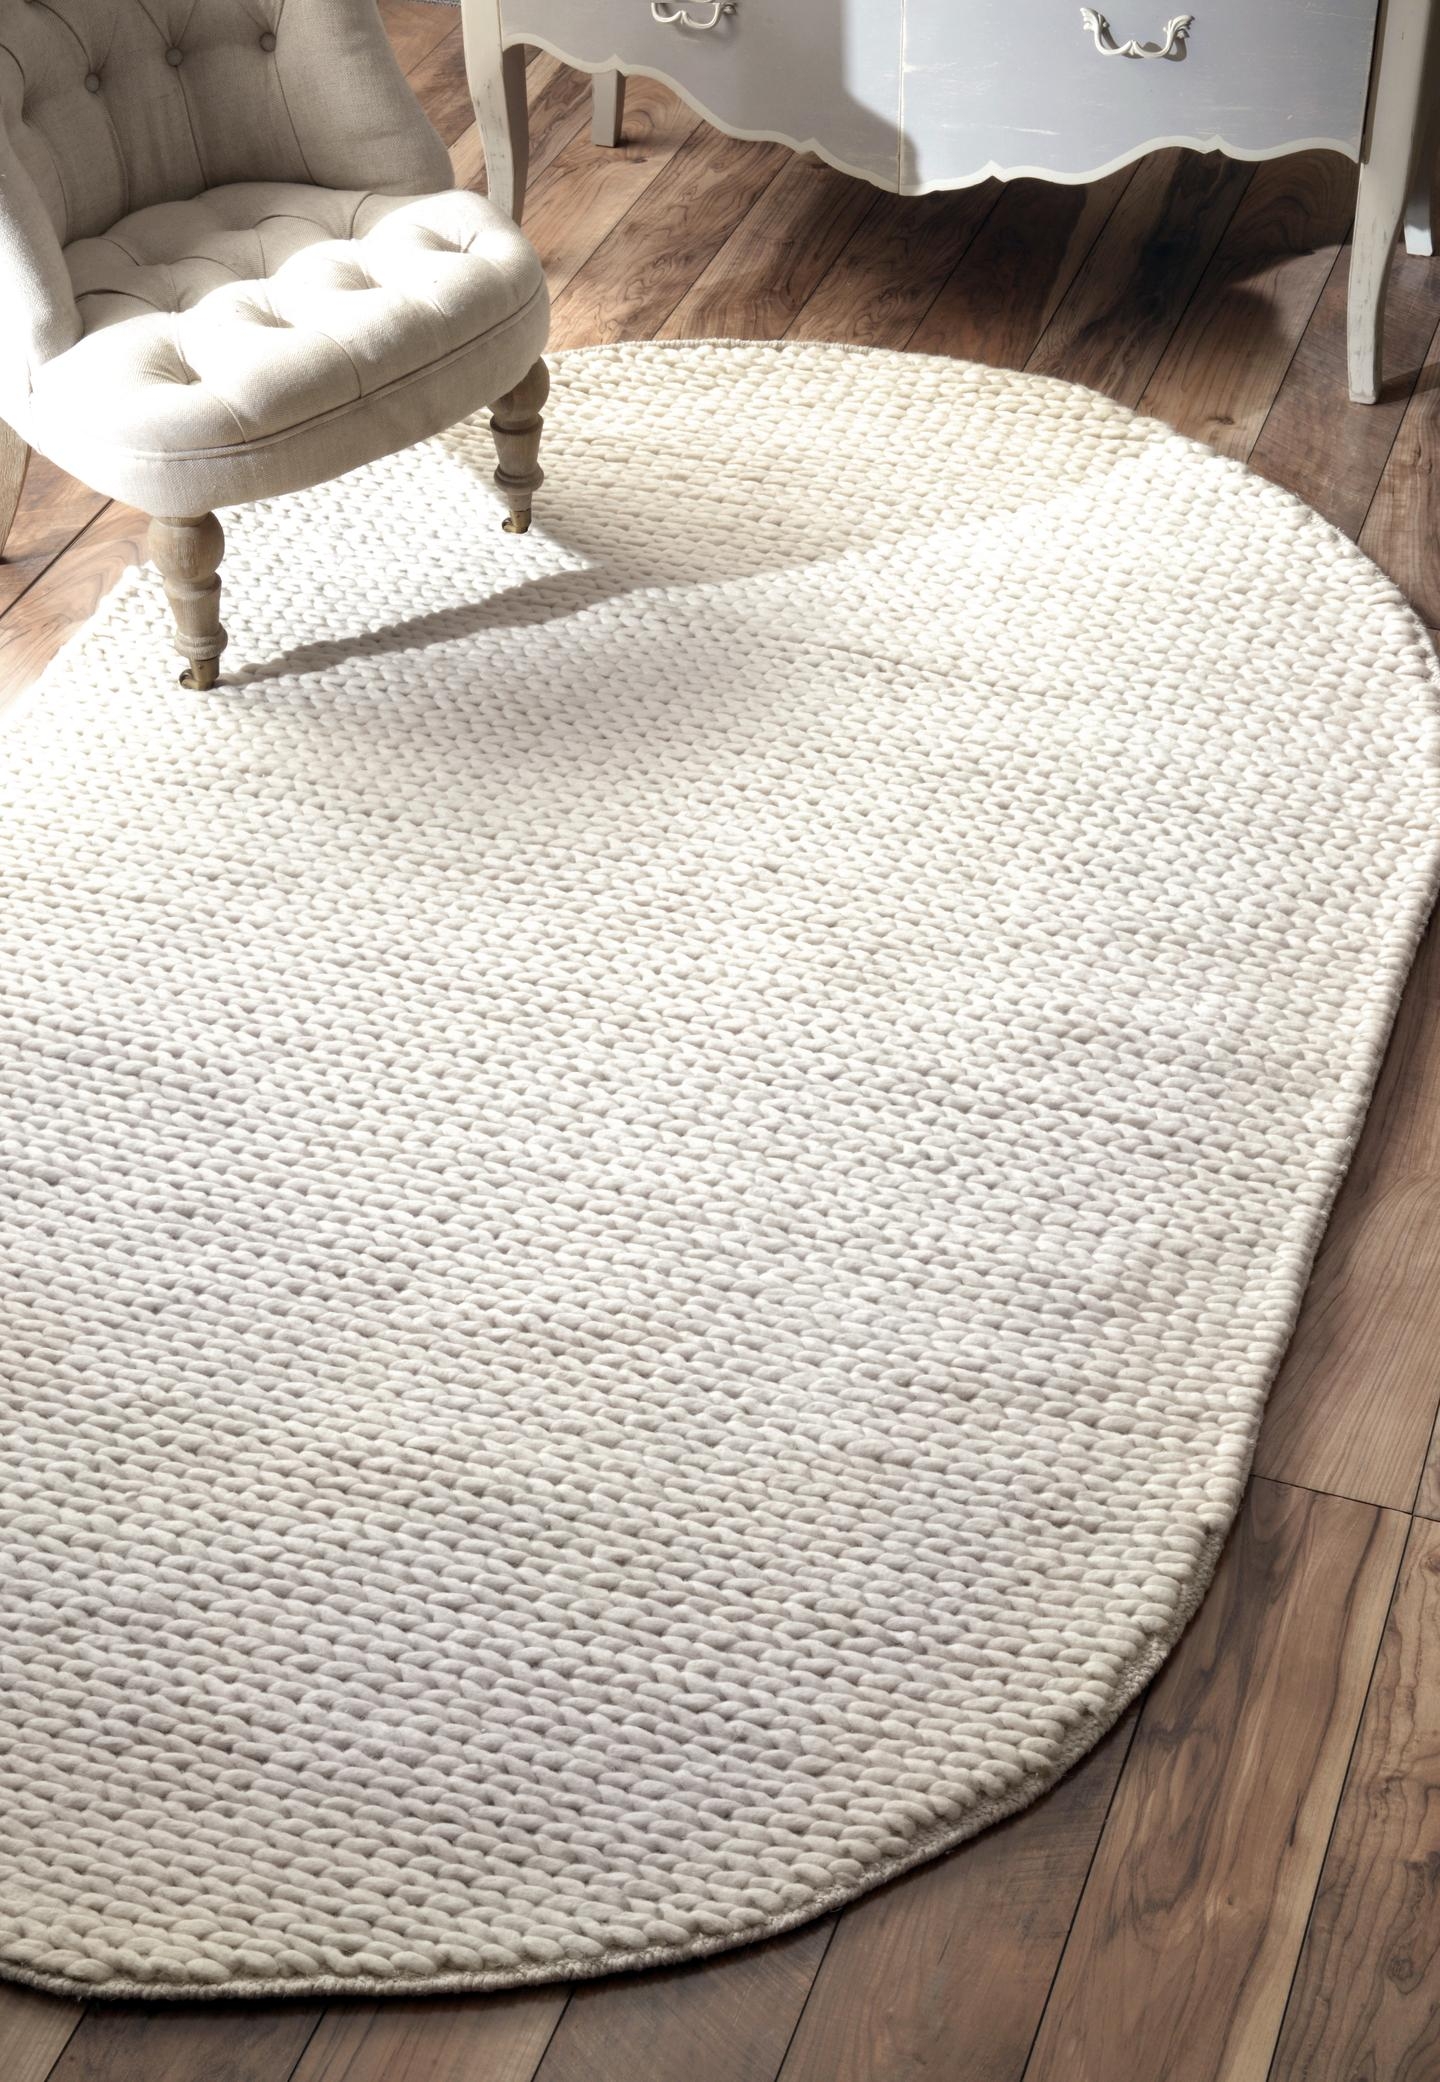 Hand Woven Chunky Woolen Cable Rug Area Rug - Image 4